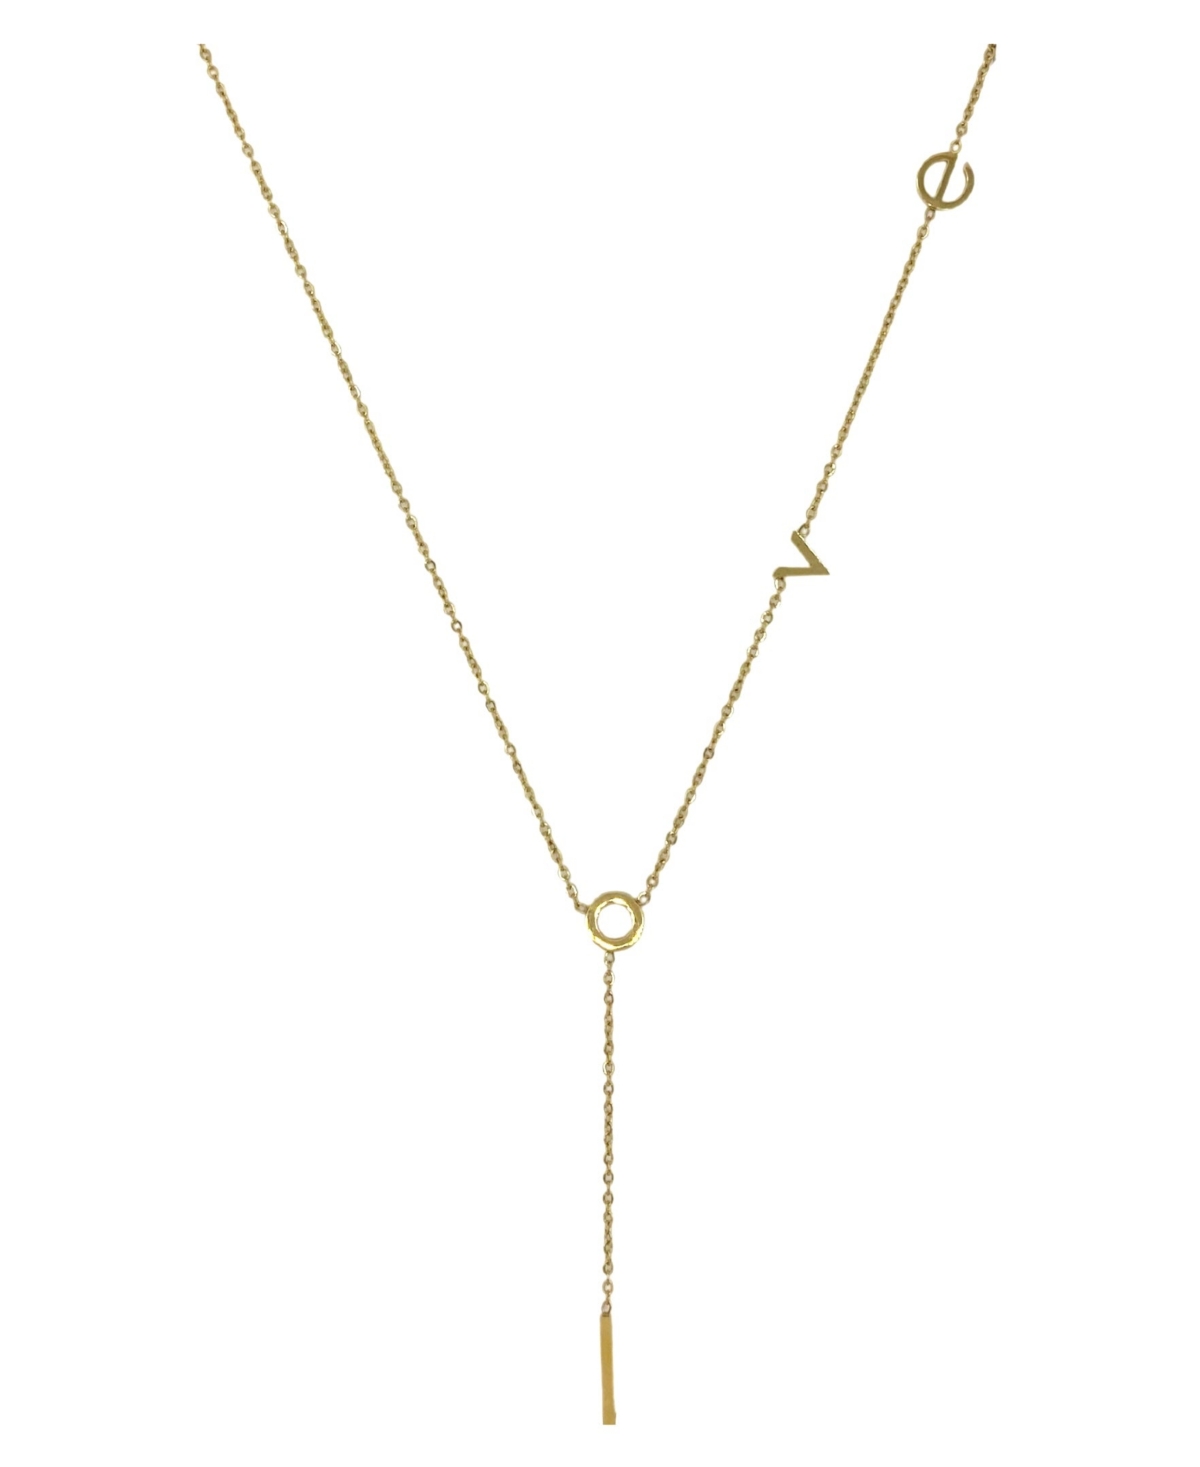 Women's Love Y-Chain Necklace - Gold-Tone